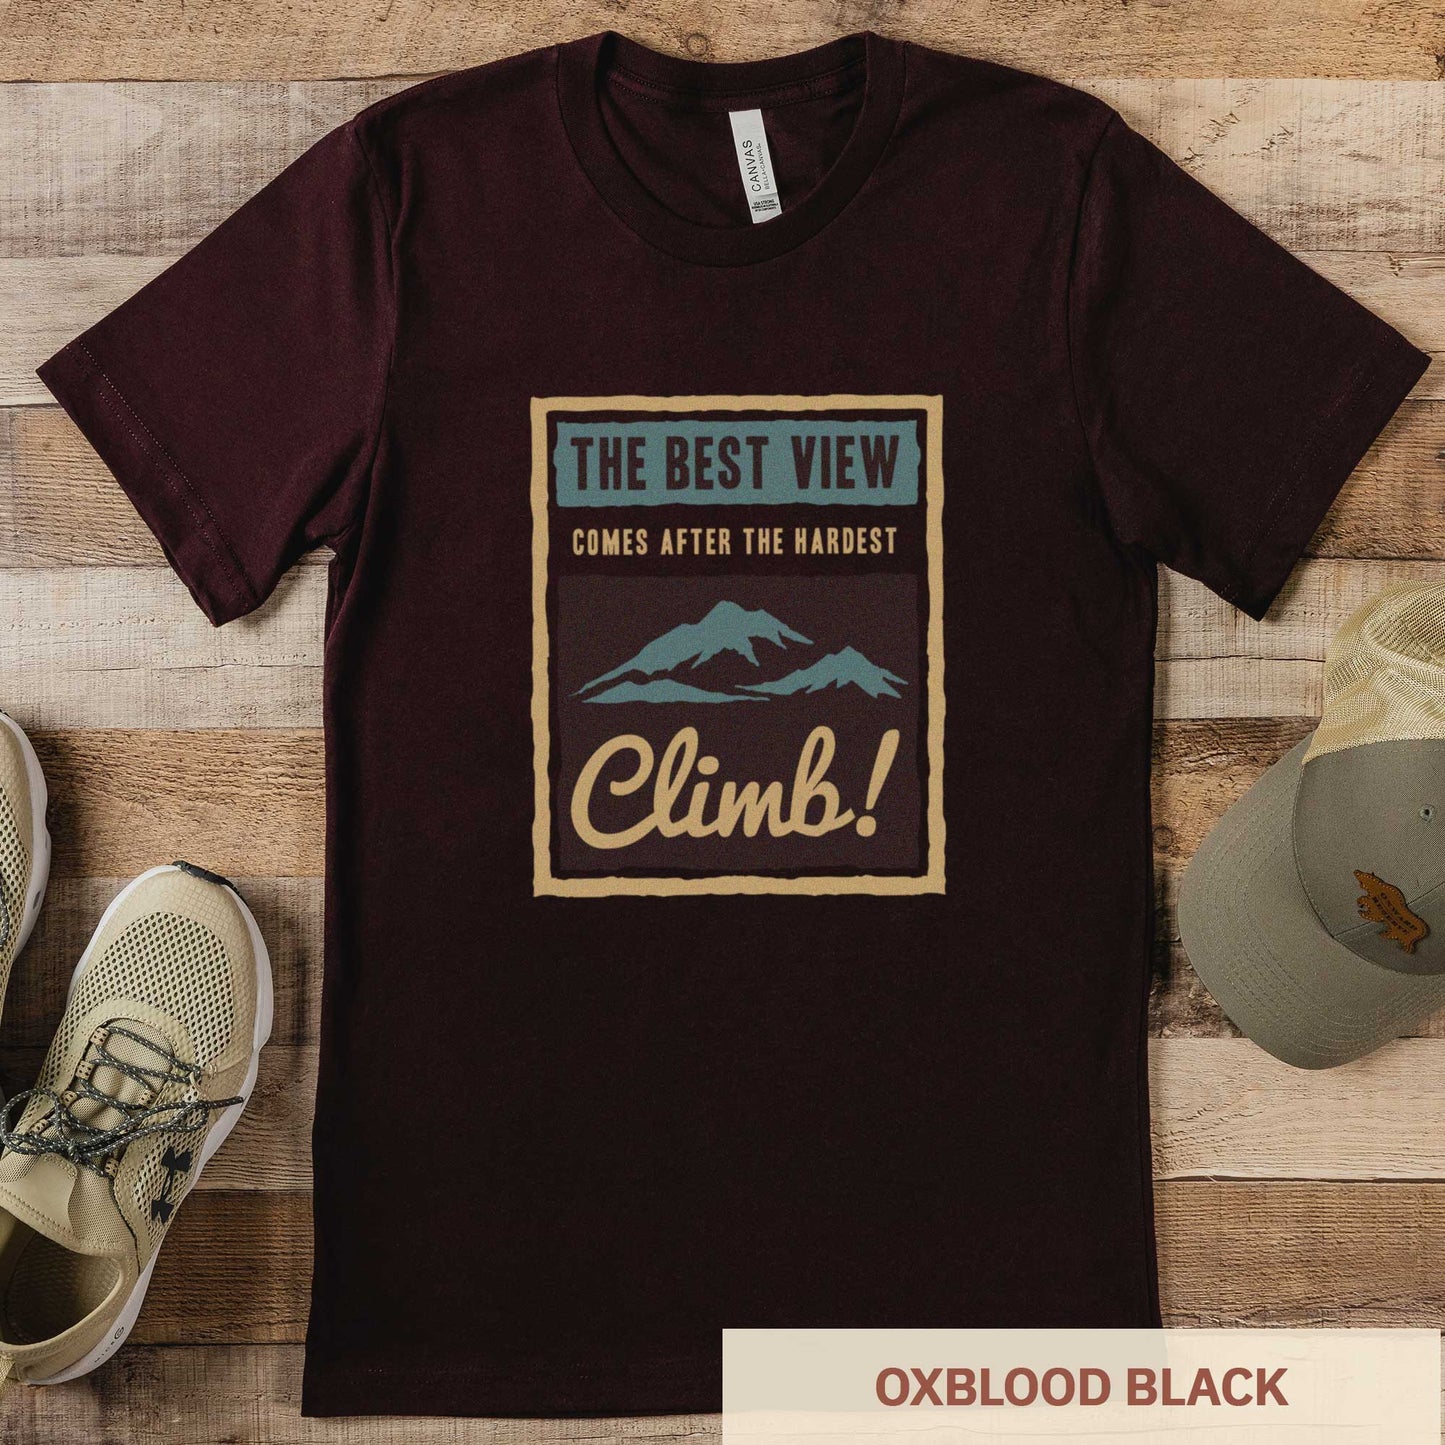 An oxblood black Bella Canvas t-shirt that features mountains and the words the best view comes after the hardest climb.